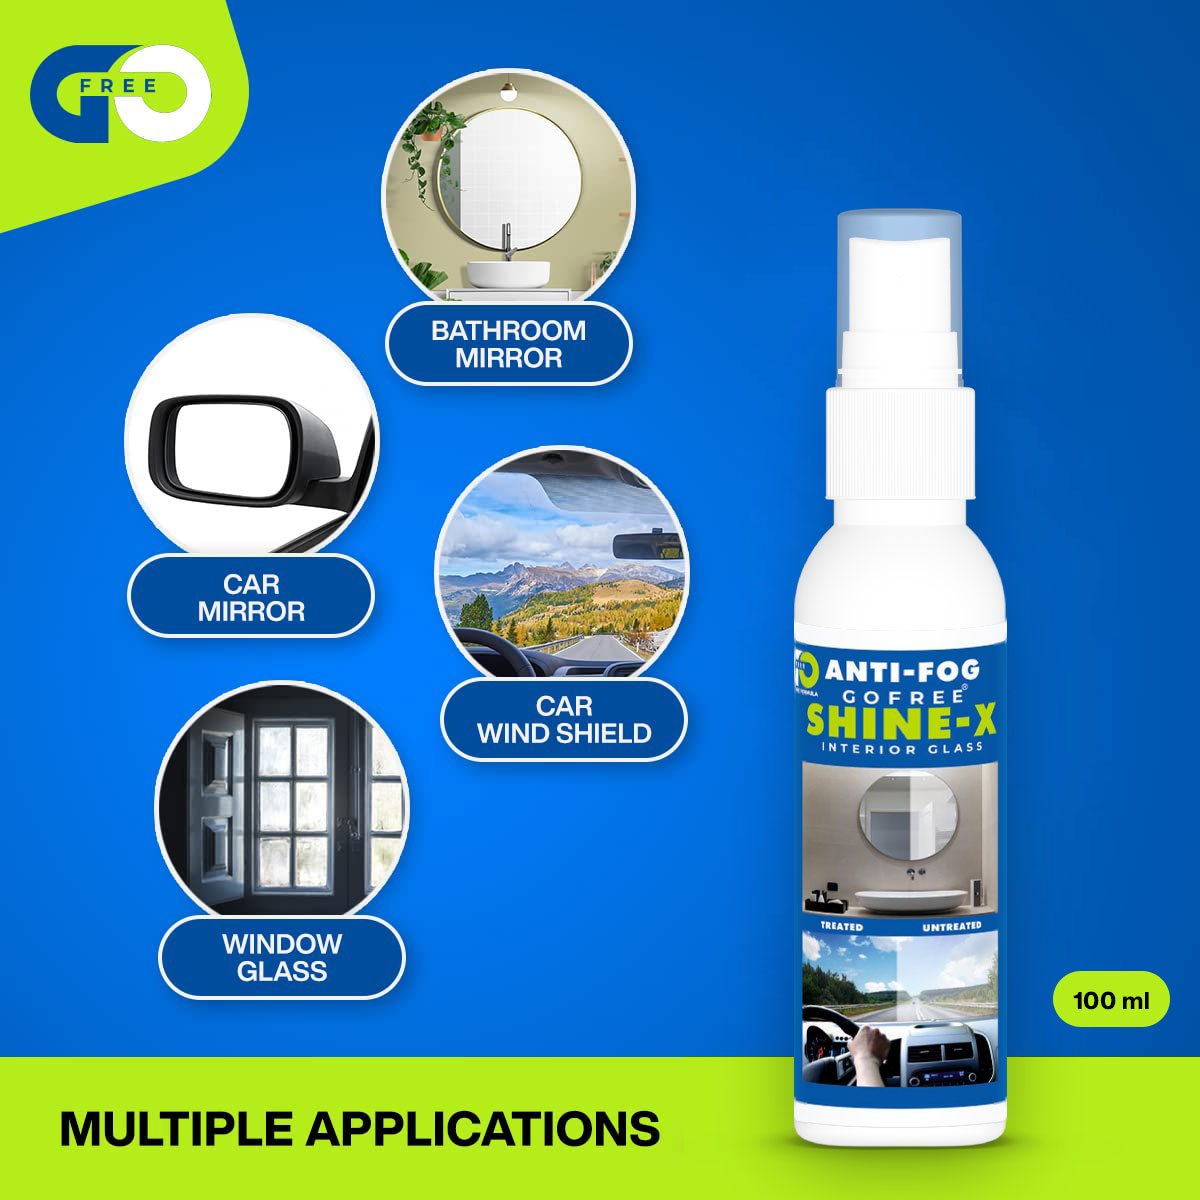 GOFREE Shine - X Anti-Fog Spray for Car Interior Glass and Bathroom Mirror - Try a Tester for free pay only 50 for shipping